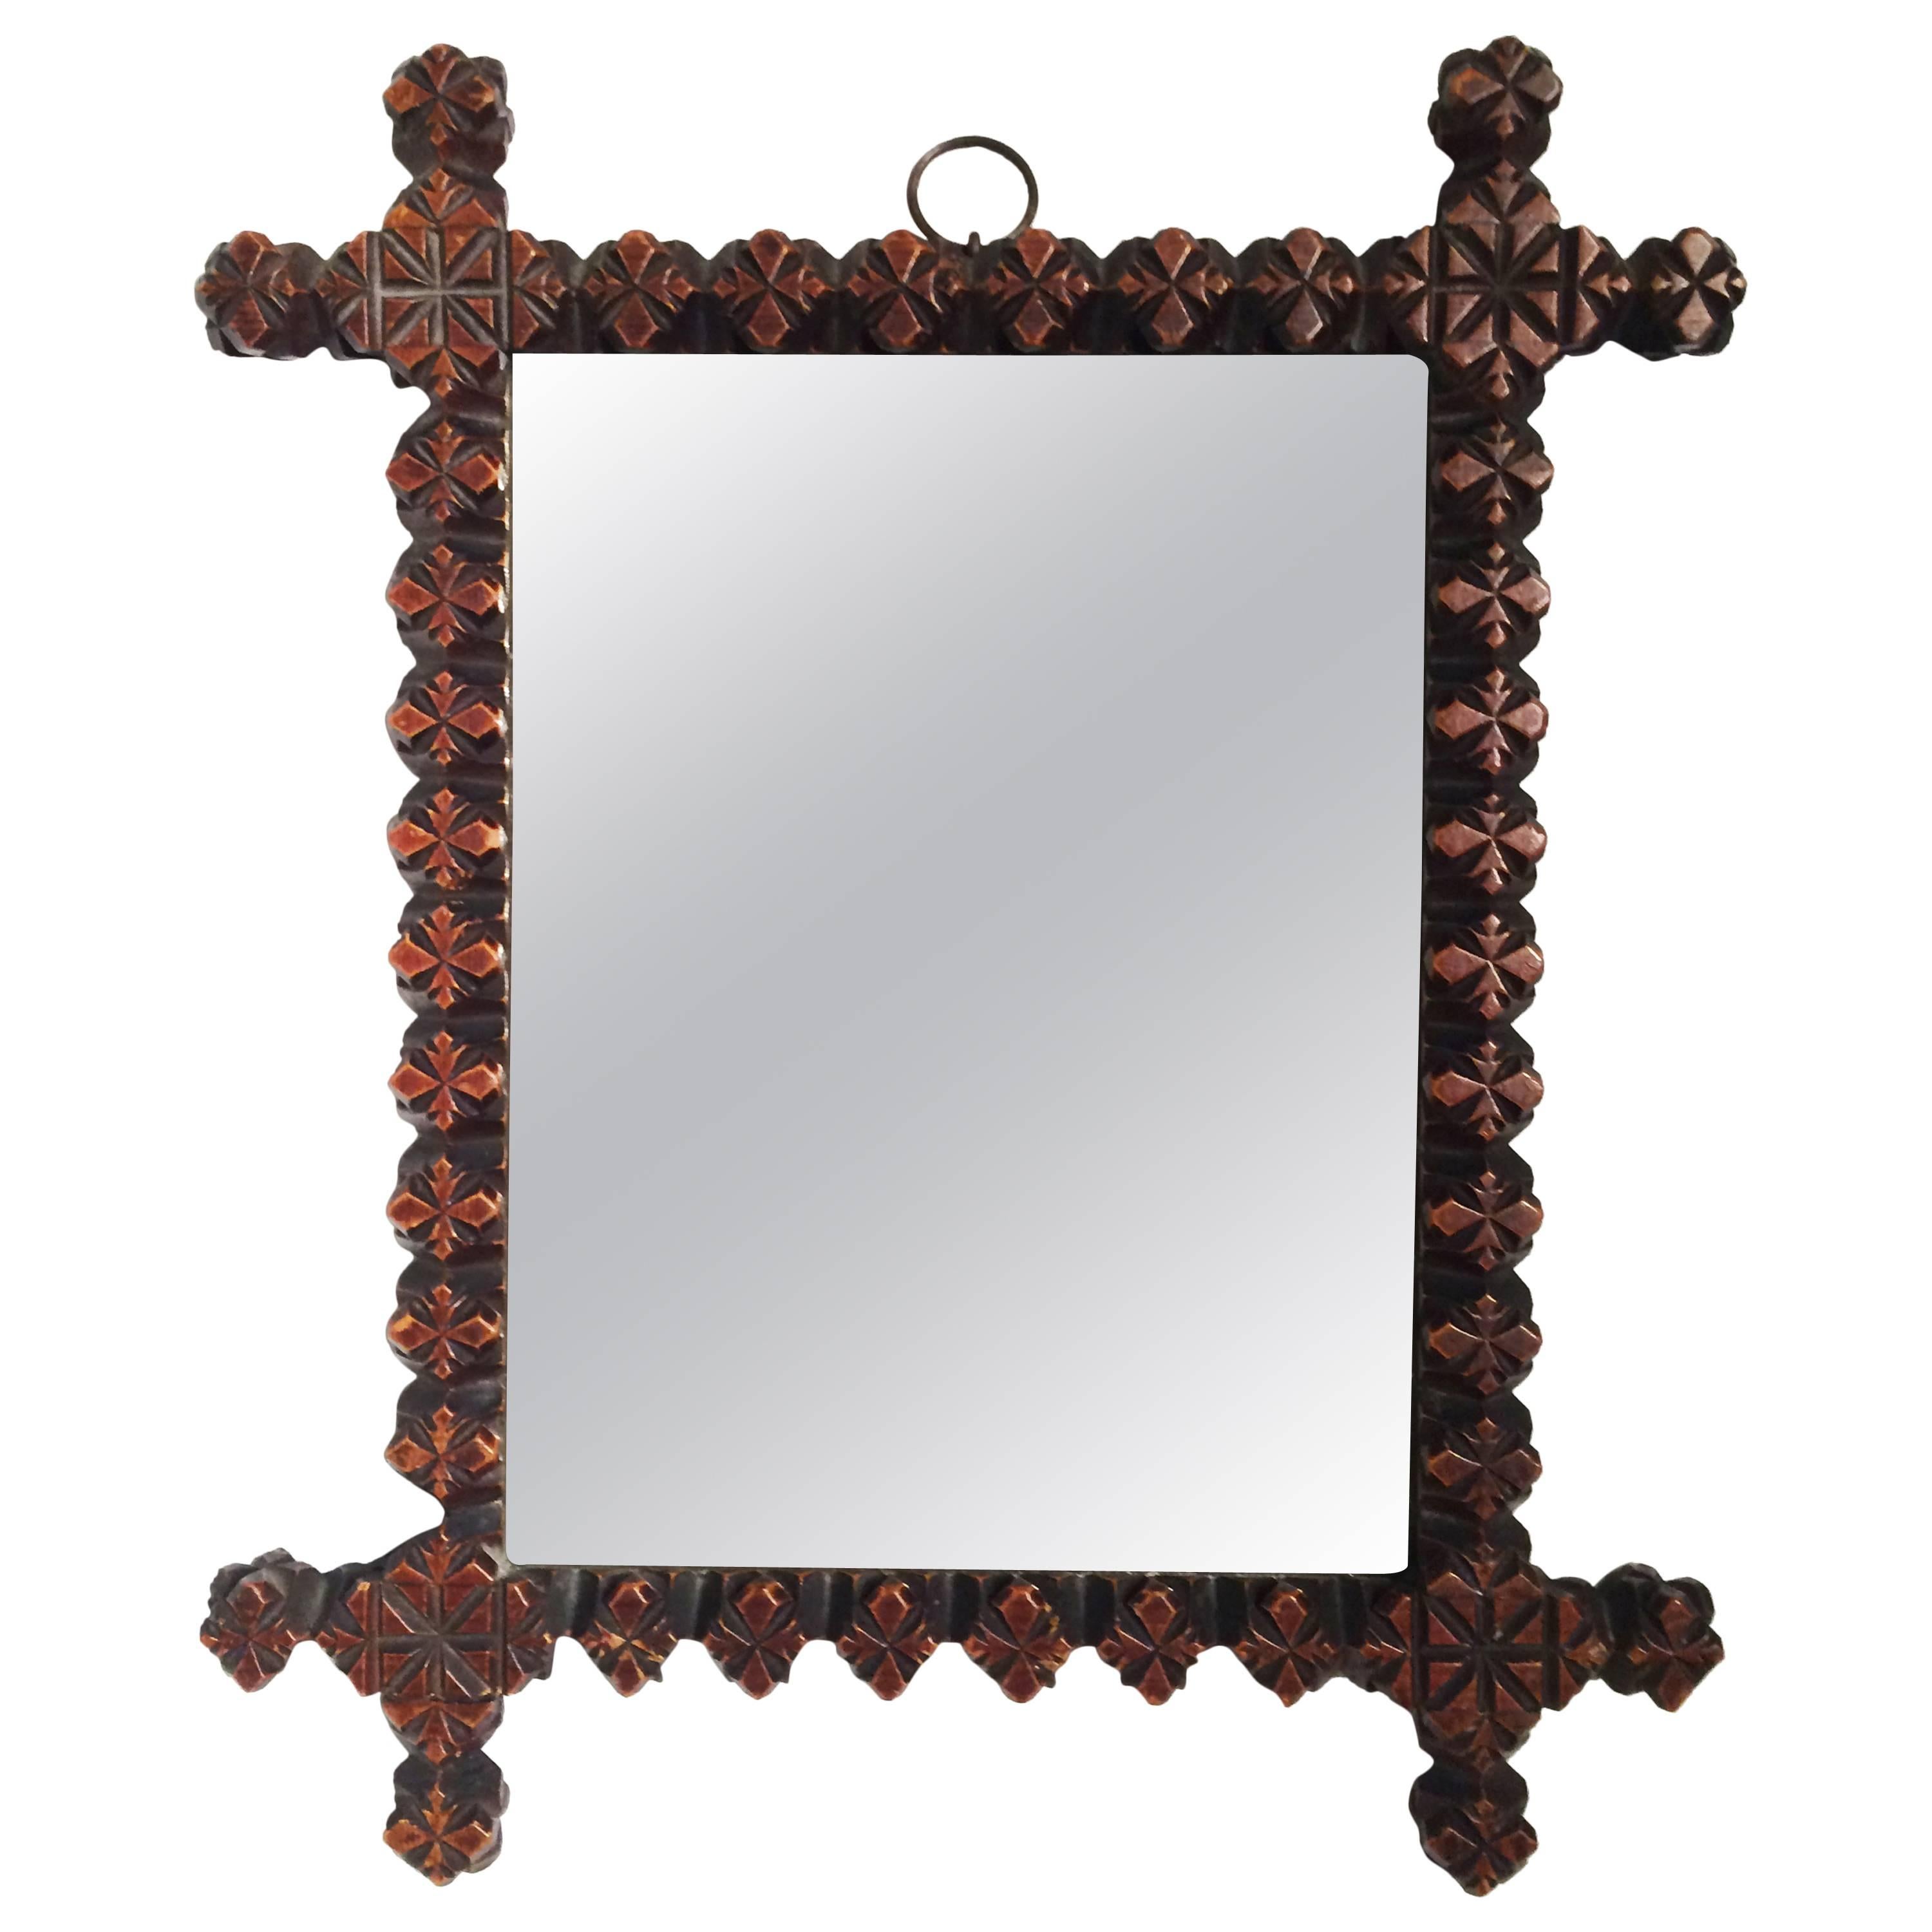 Early 20th Century American Tramp Art Mirror For Sale